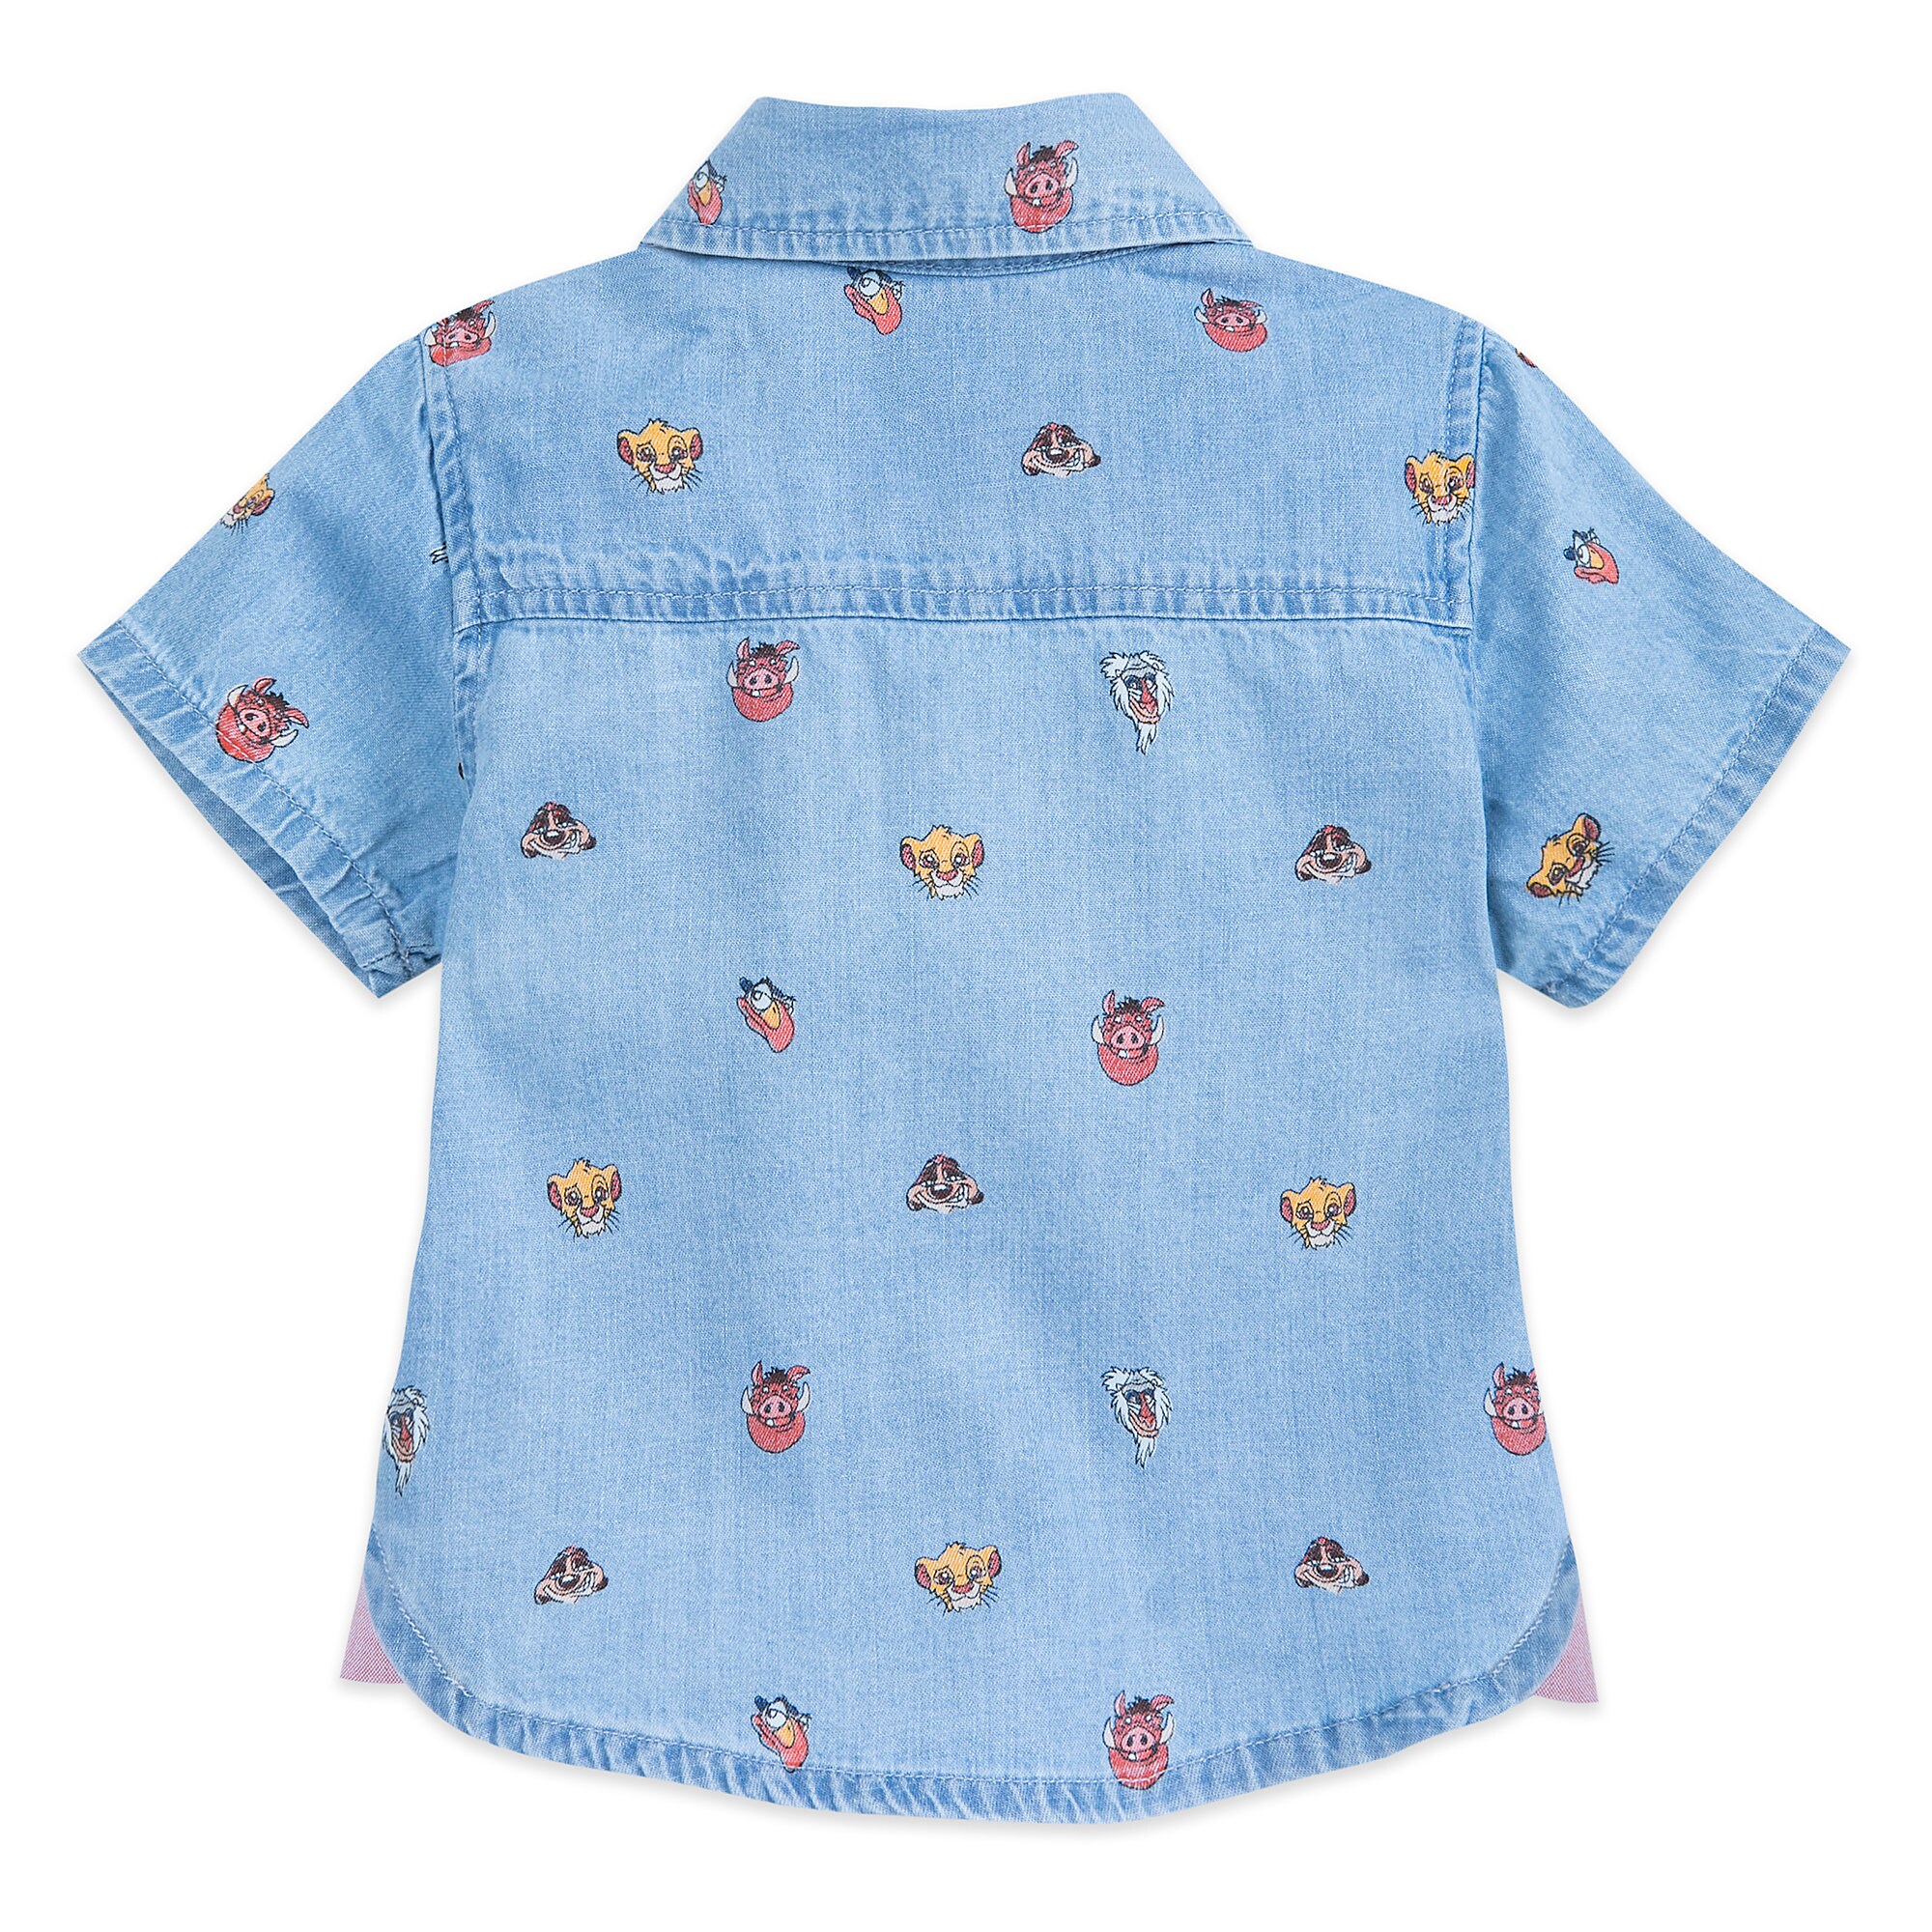 The Lion King Chambray Shirt for Baby